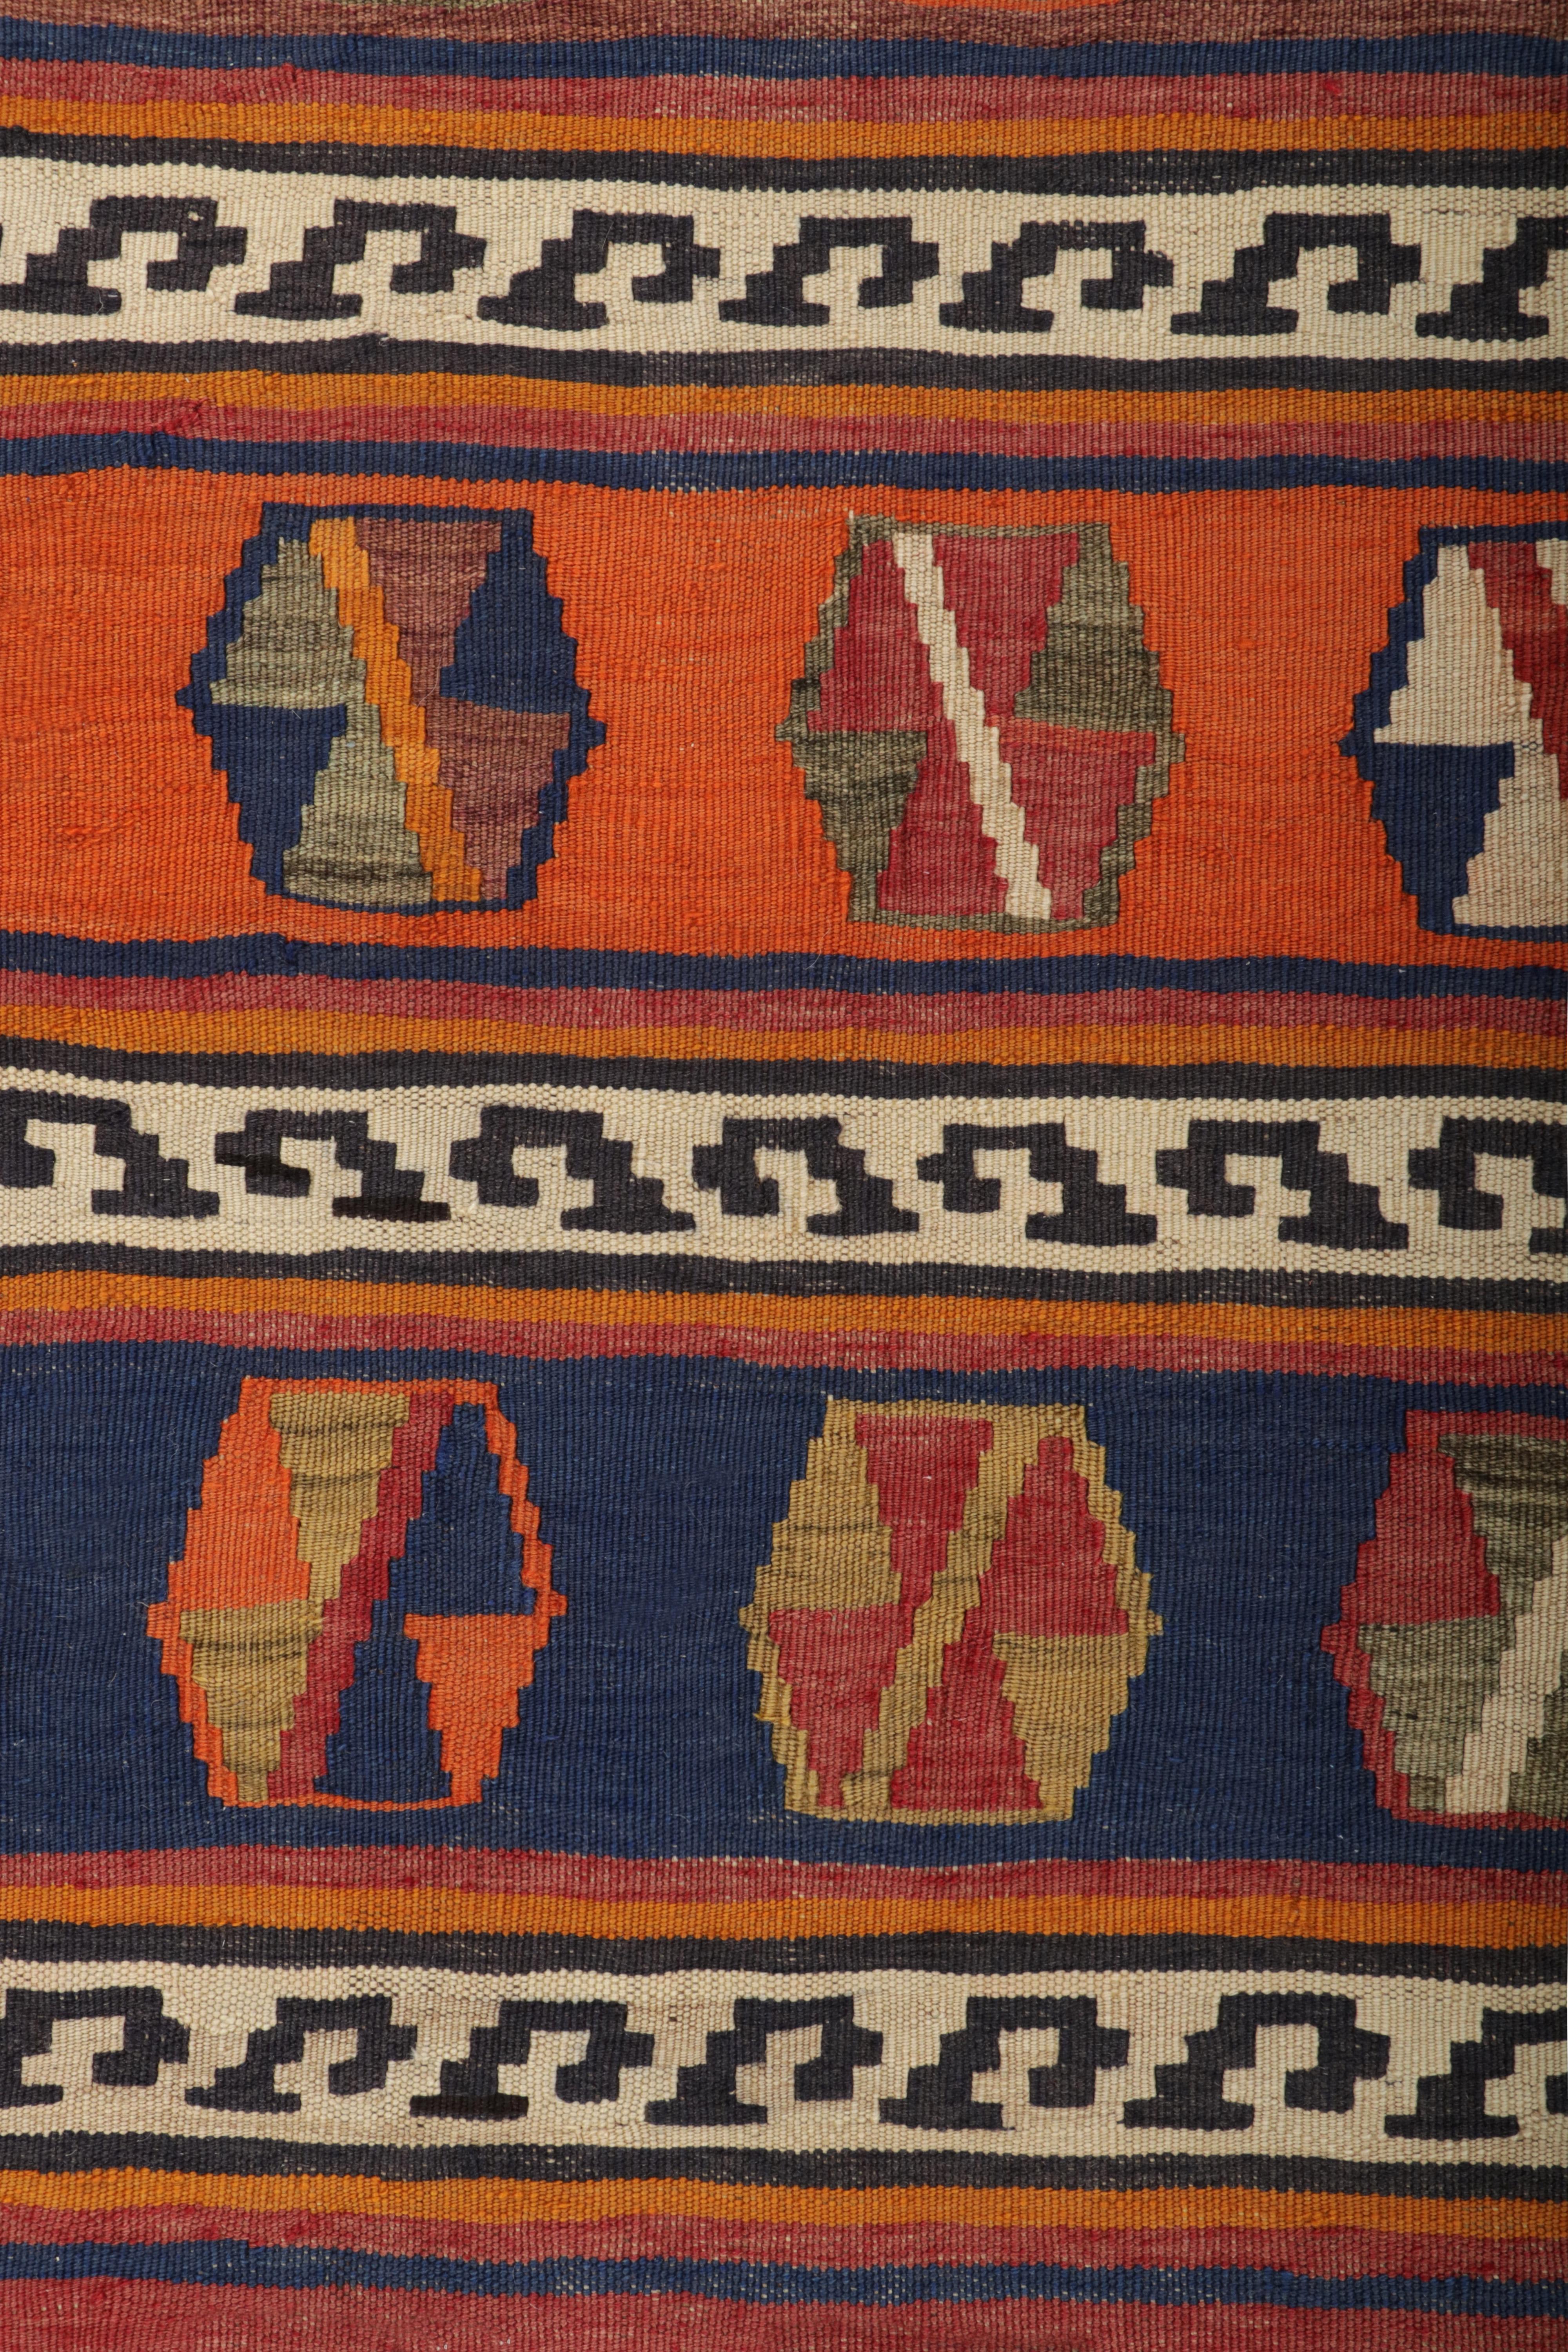 Mid-20th Century Vintage Qashqai Persian Kilim in Orange with Geometric Patterns For Sale